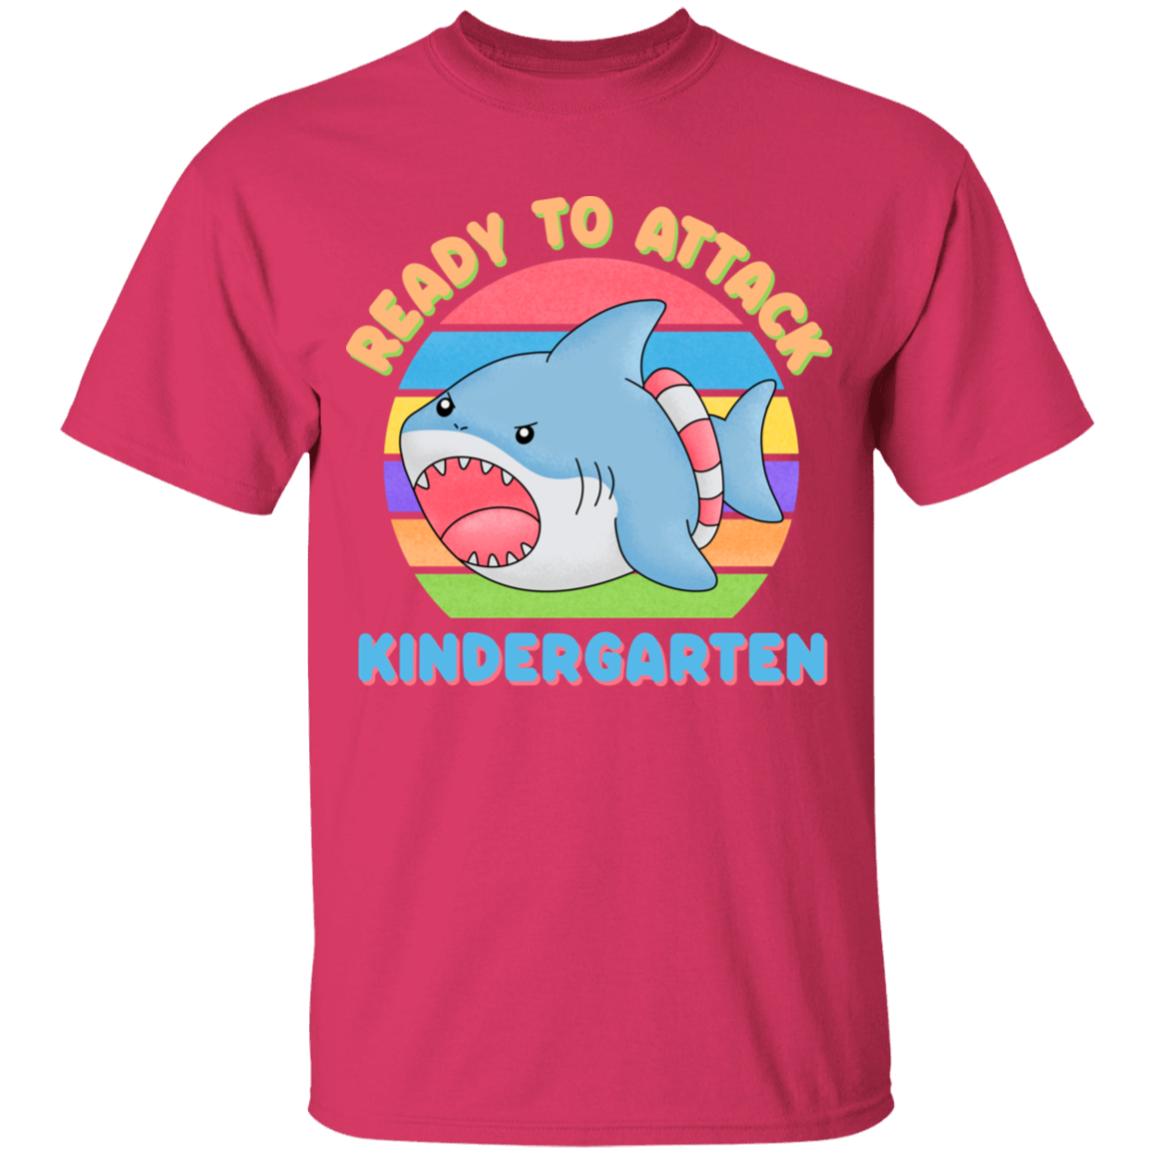 Ready to Attack Kindergarten Youth Cotton T-Shirt